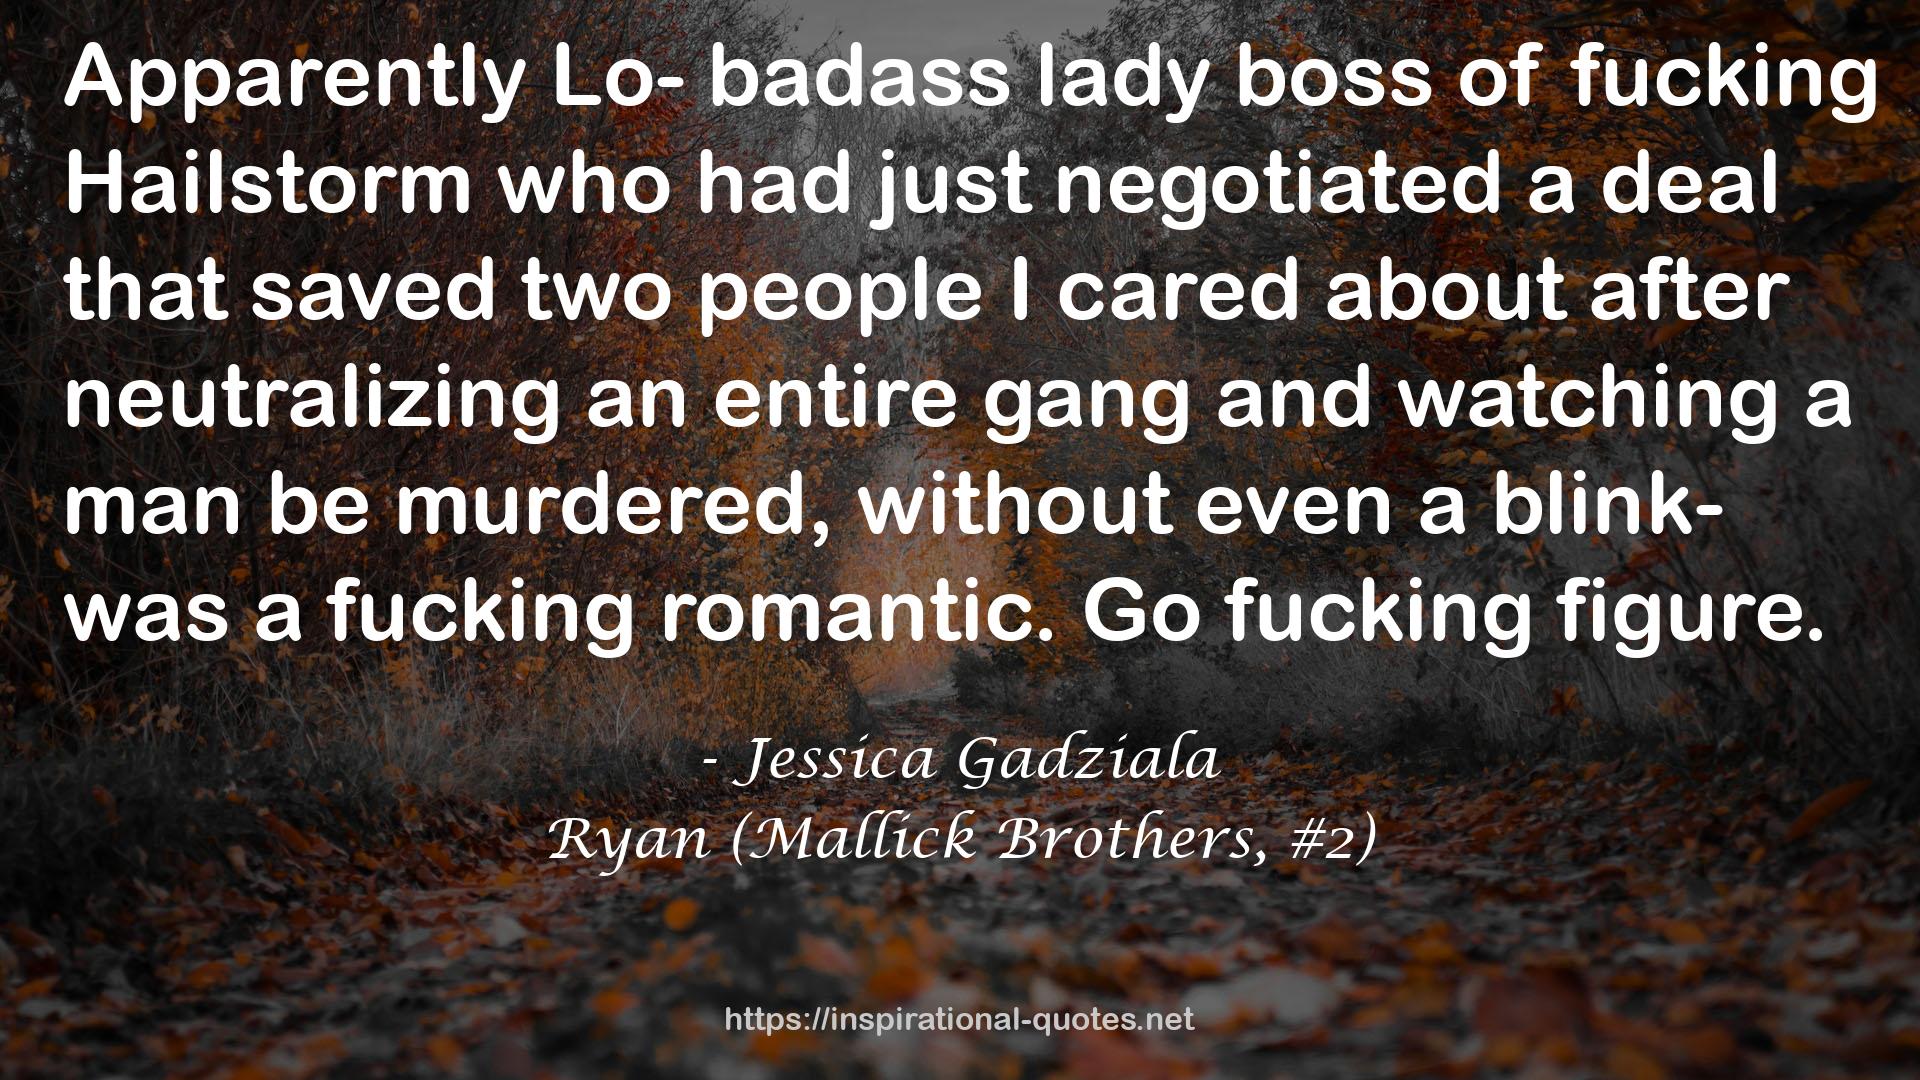 Ryan (Mallick Brothers, #2) QUOTES